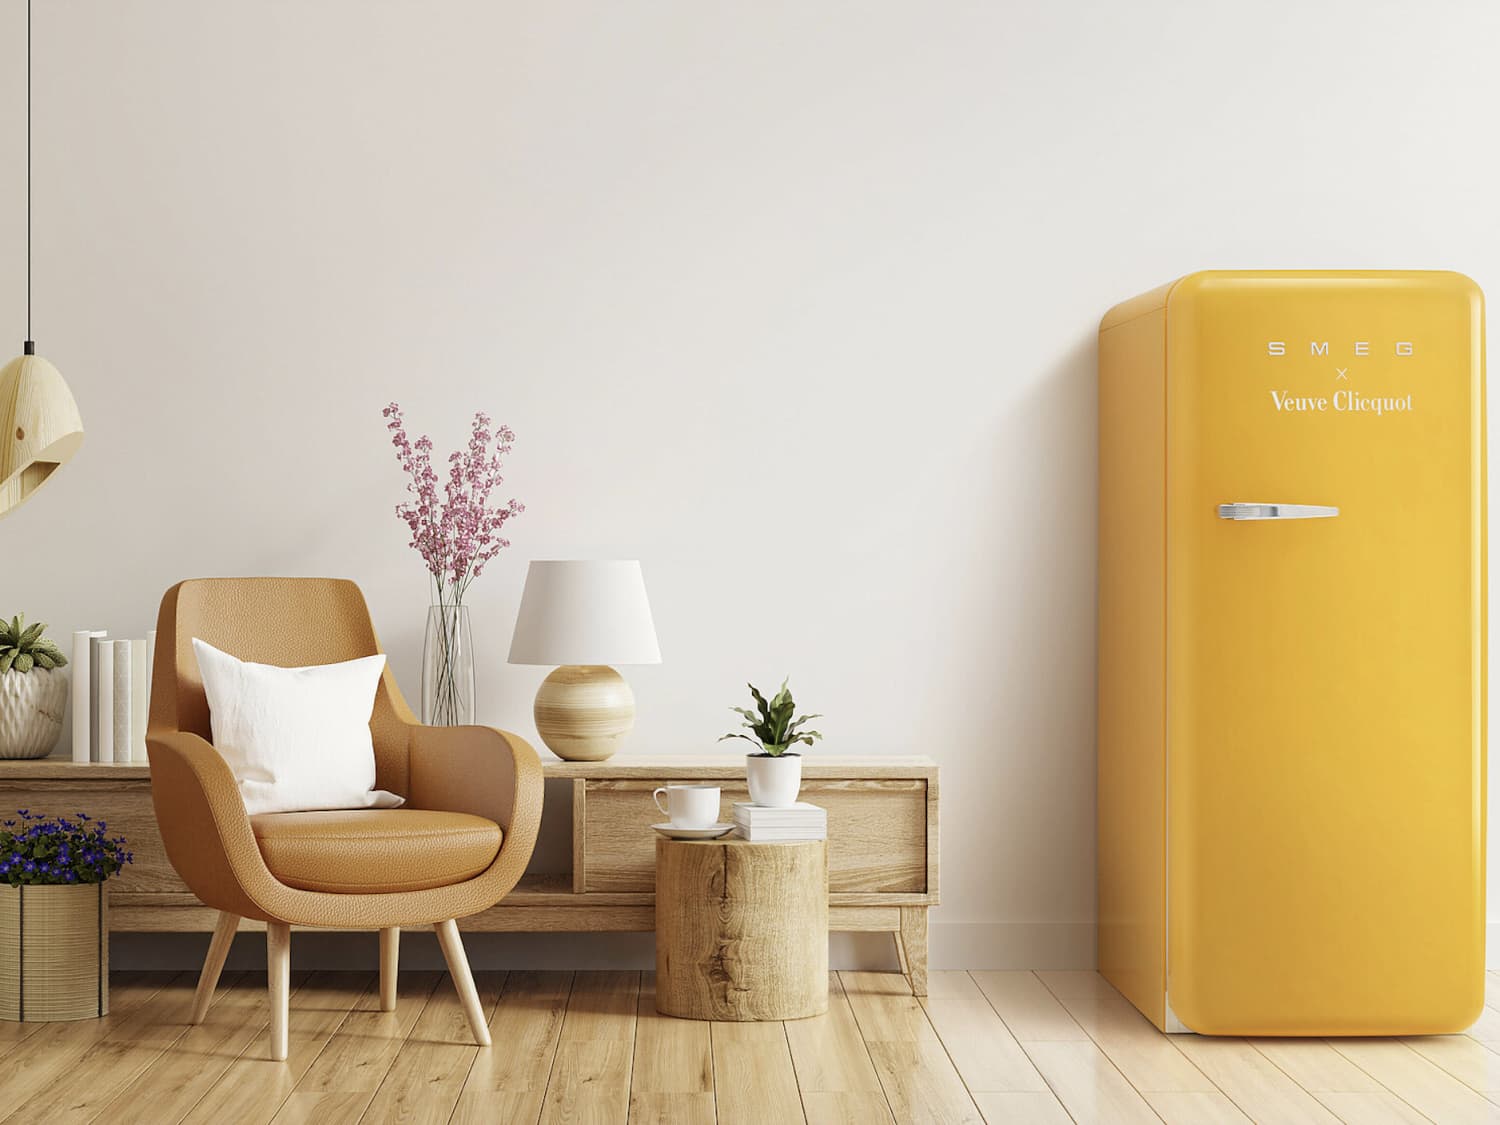 Smeg's New Limited-Edition Fridges Are Cheerful and Champagne